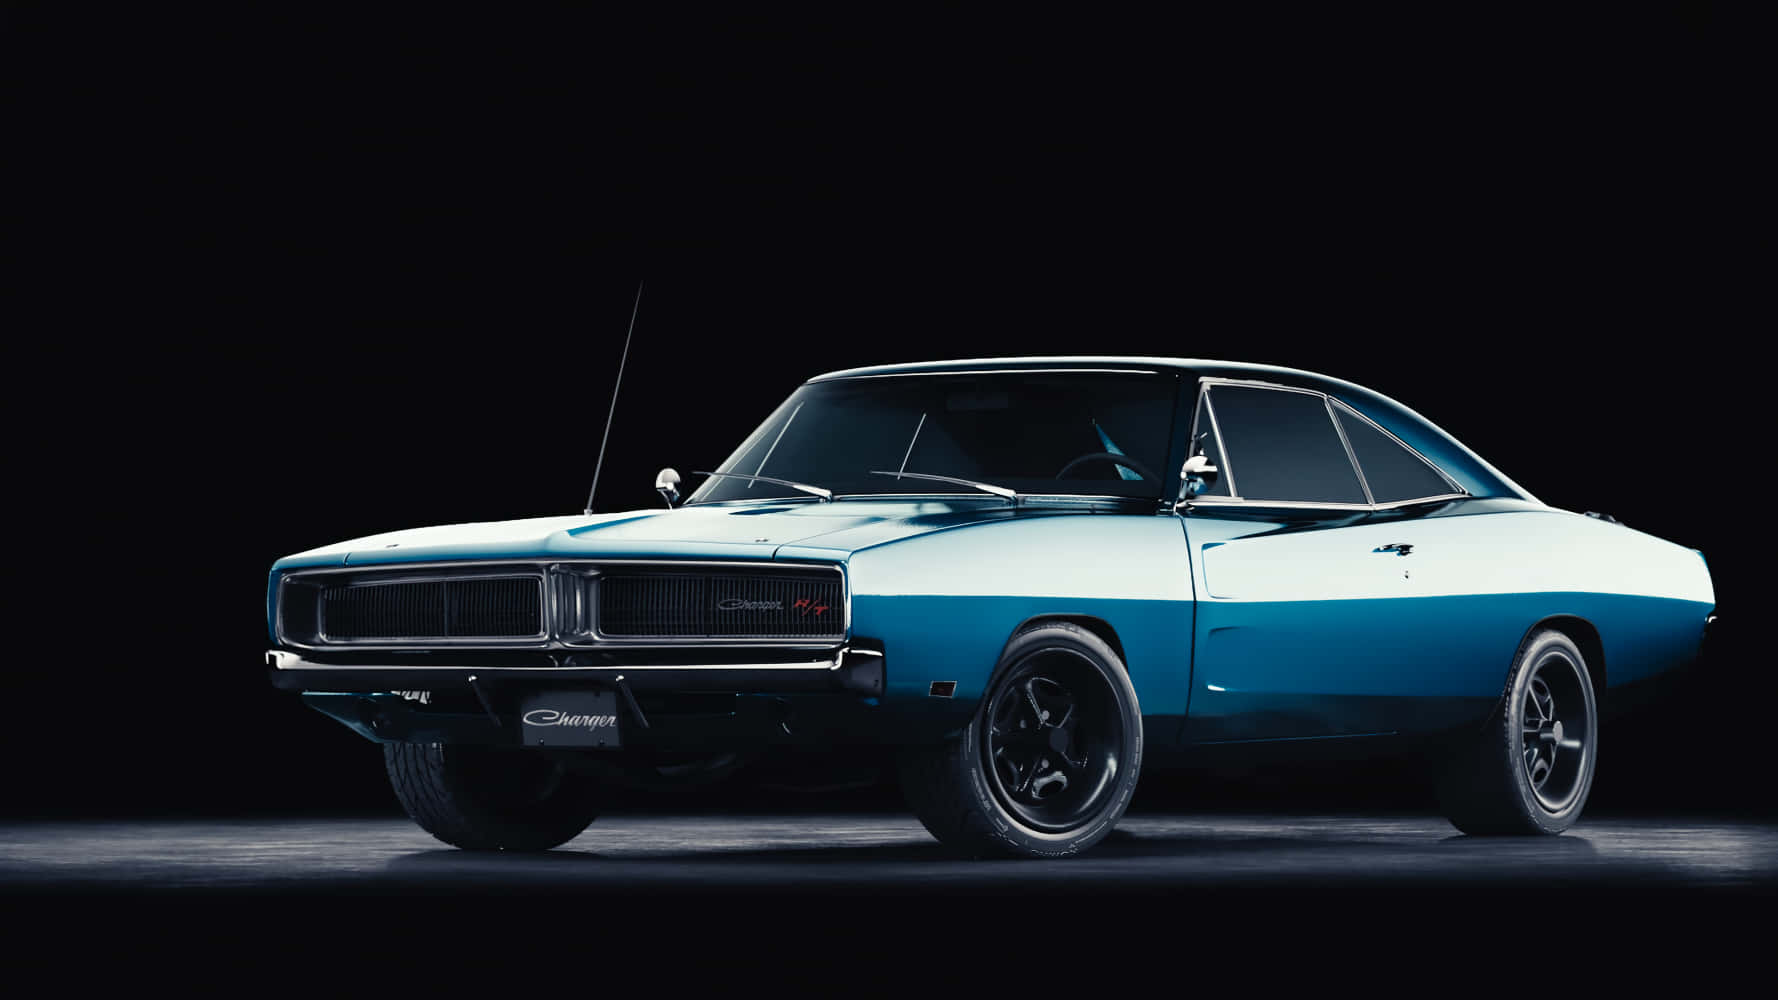 Dodge Charger - The Ultimate Muscle Car